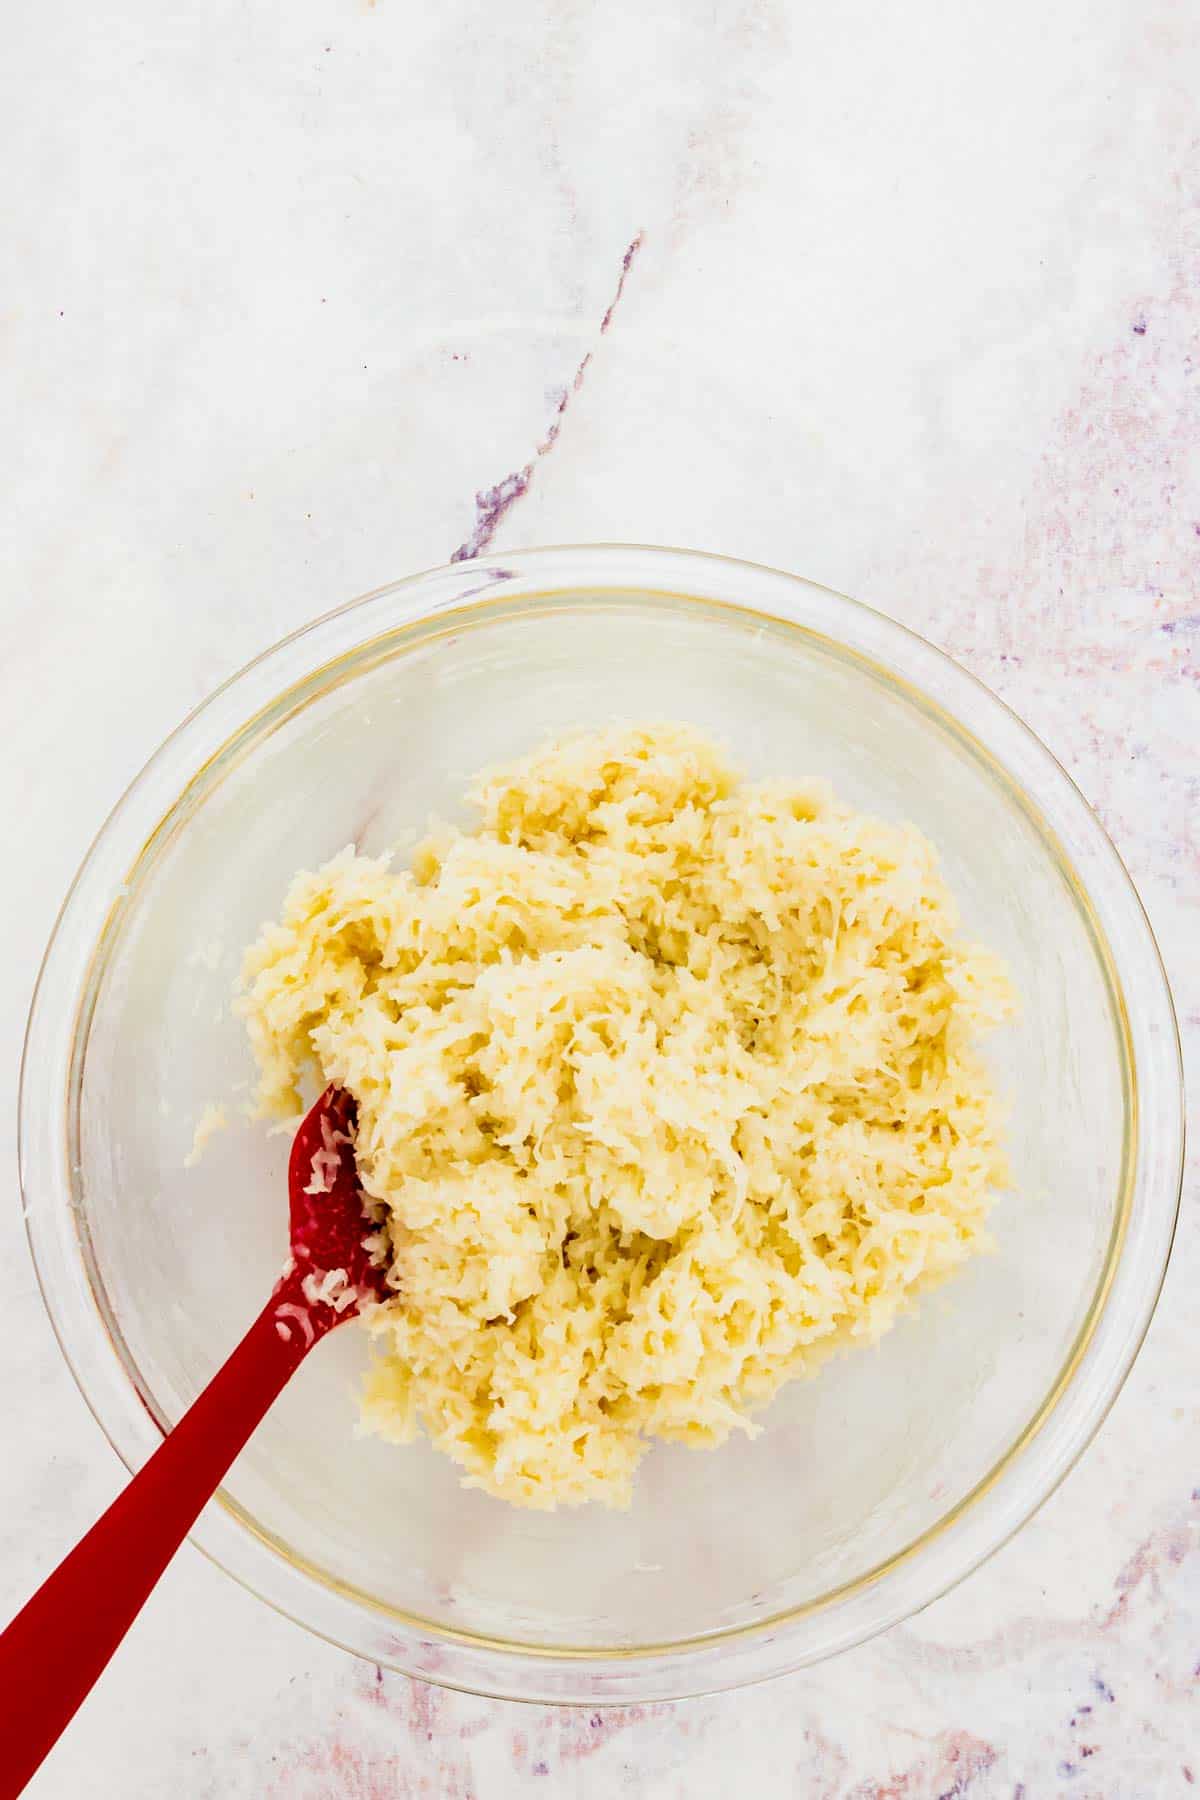 A red spatula in a glass bowl of a mixture of shredded coconut and sweetened condensed milk.